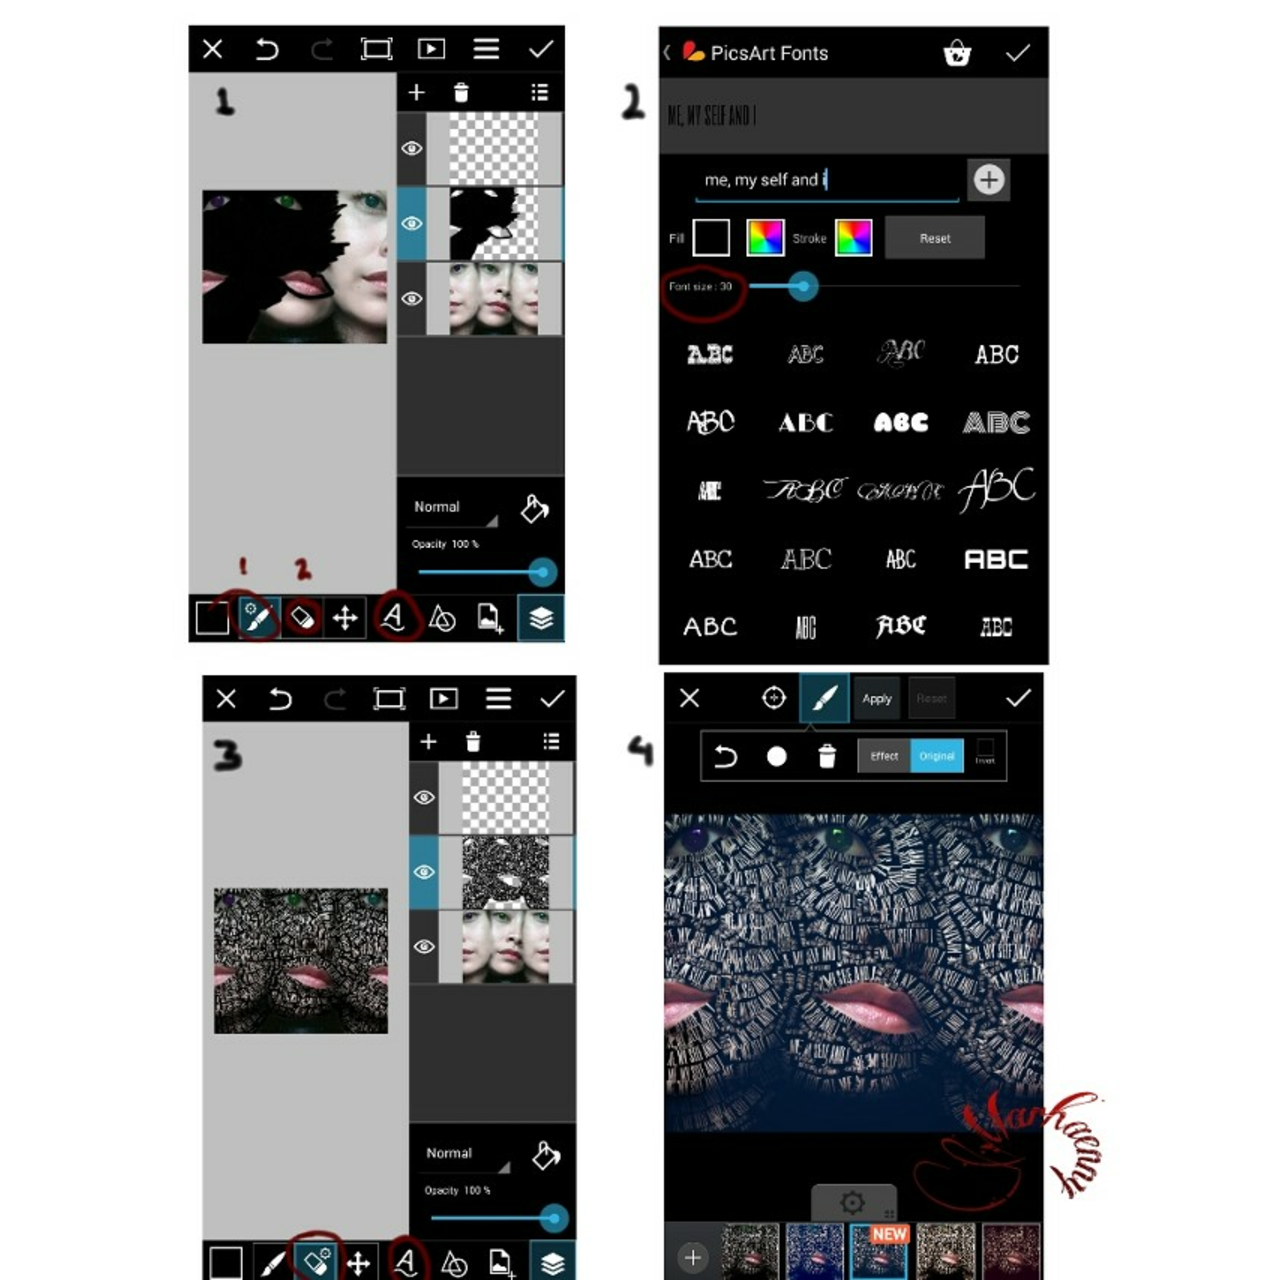 picsart fonts for android